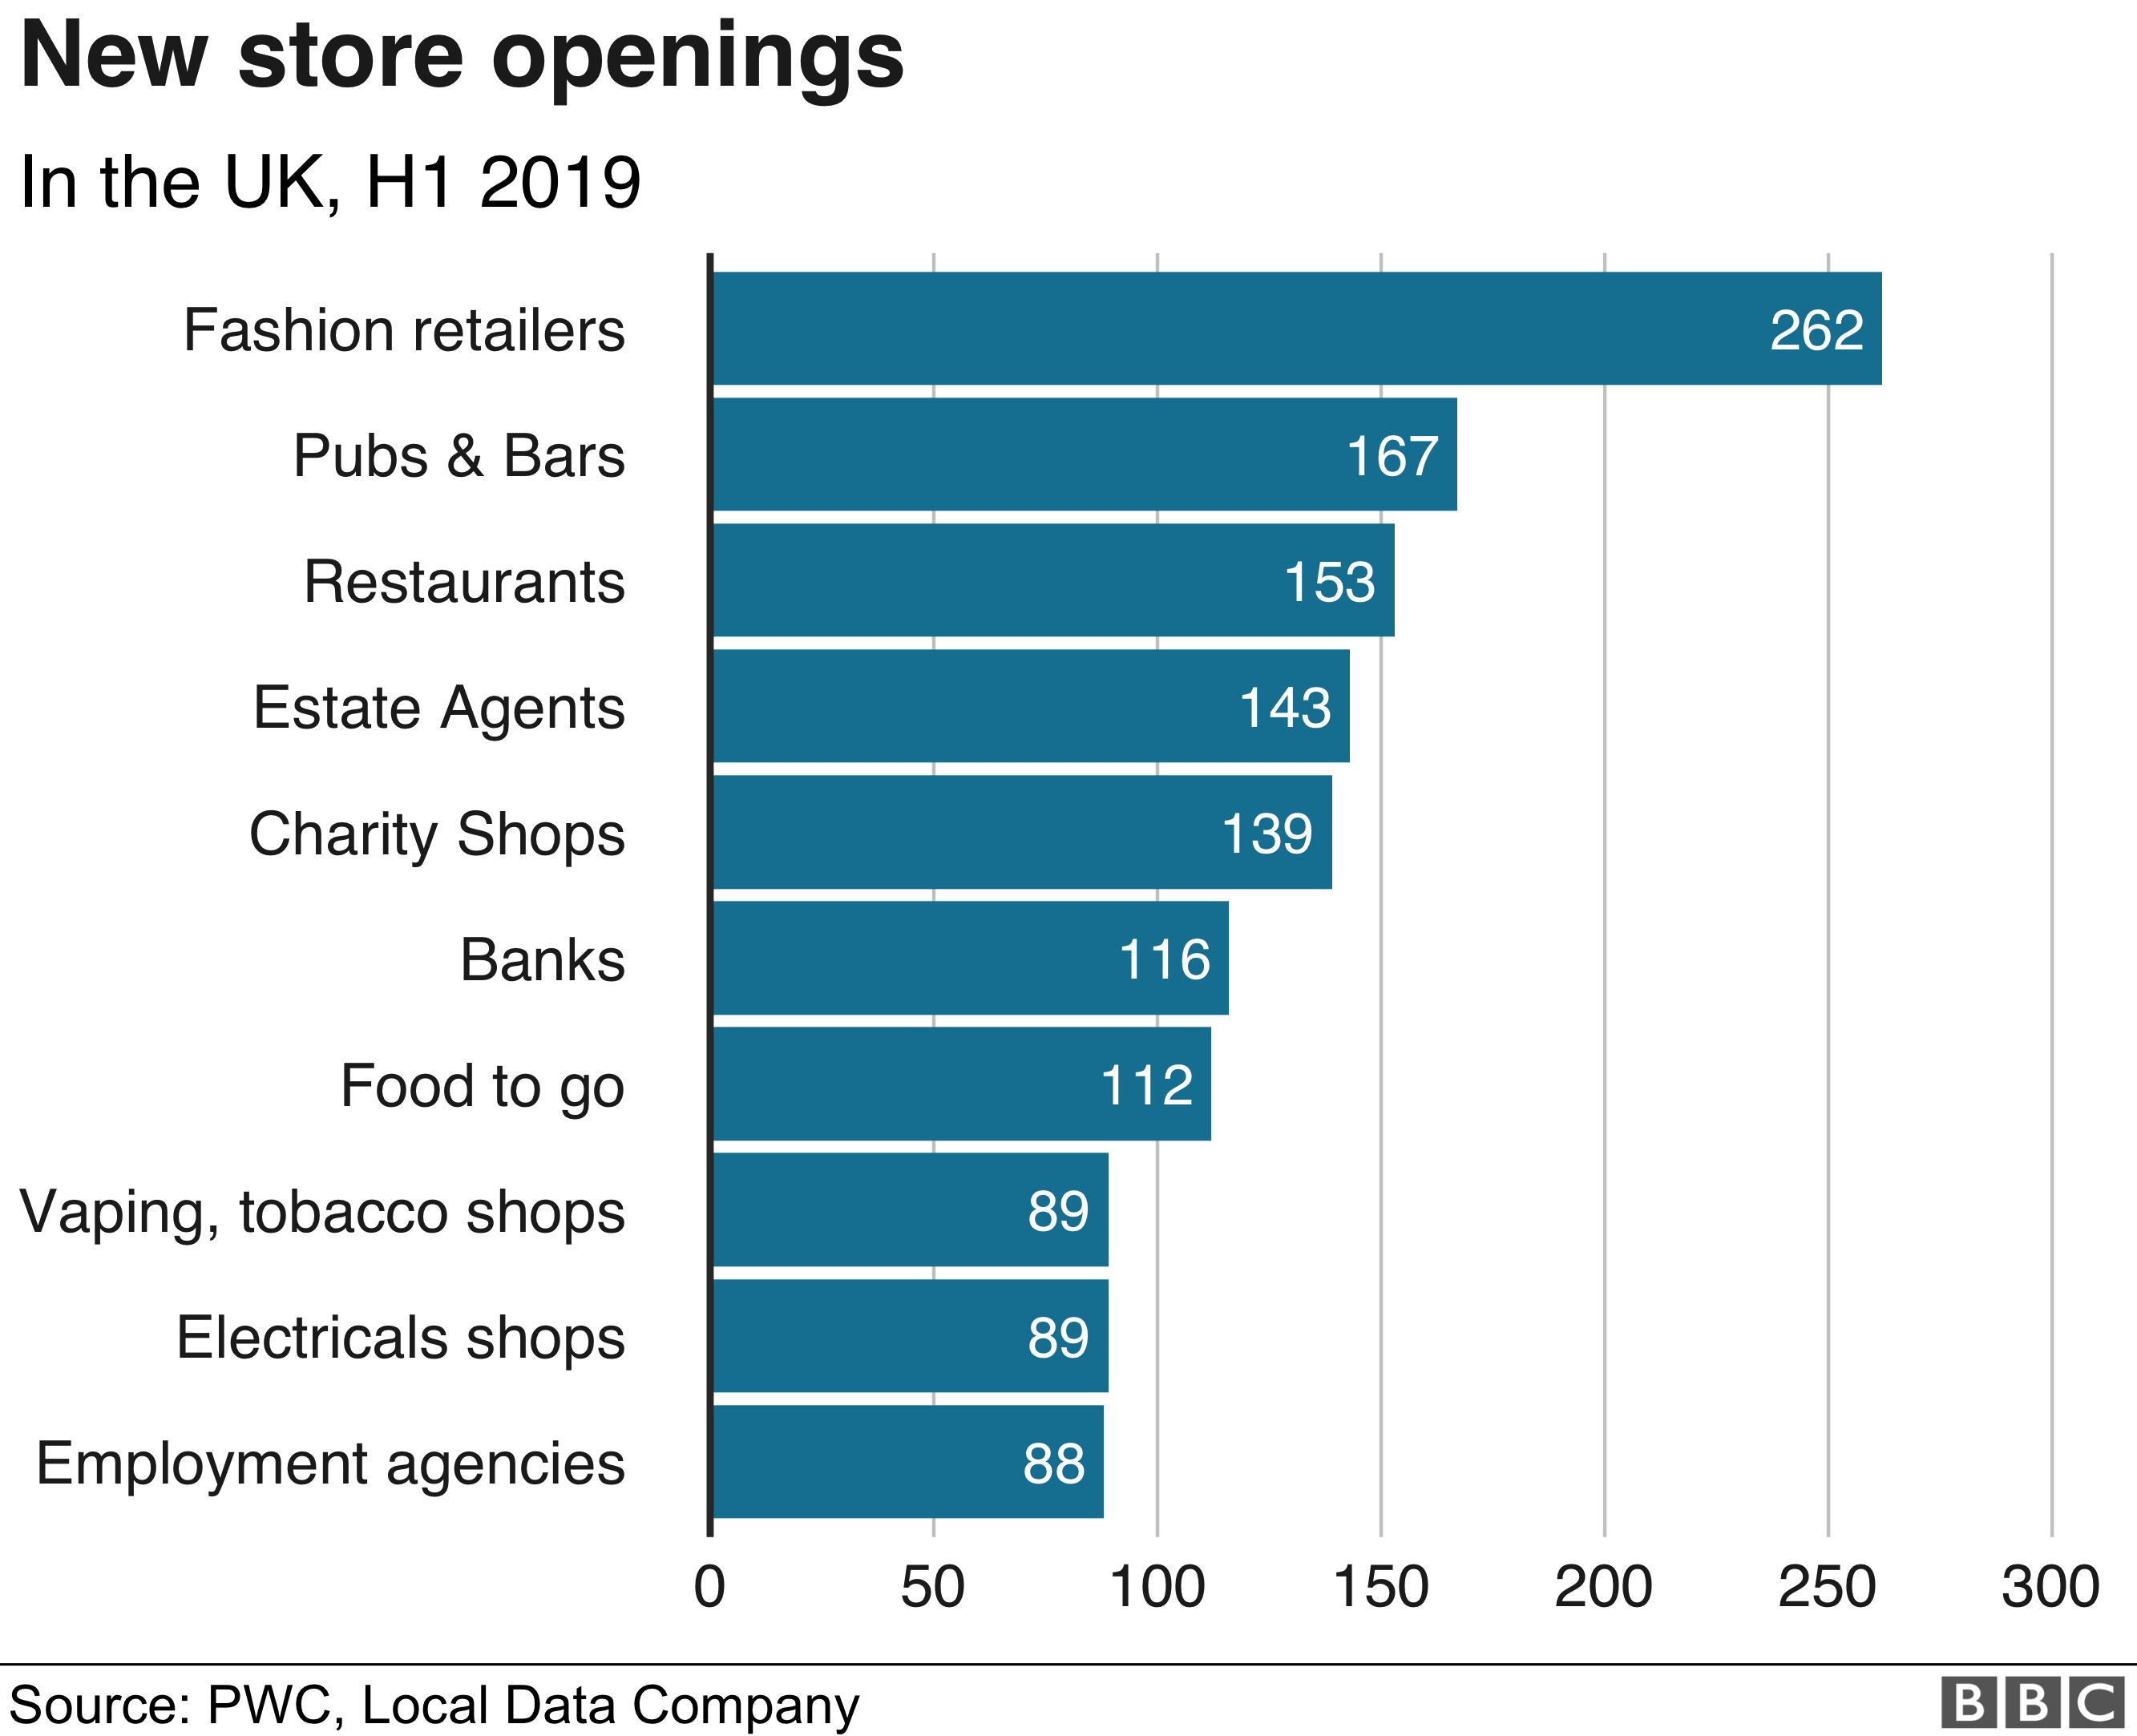 Chart showing fastest growing categories of shops opening on UK High Streets H1 2019.